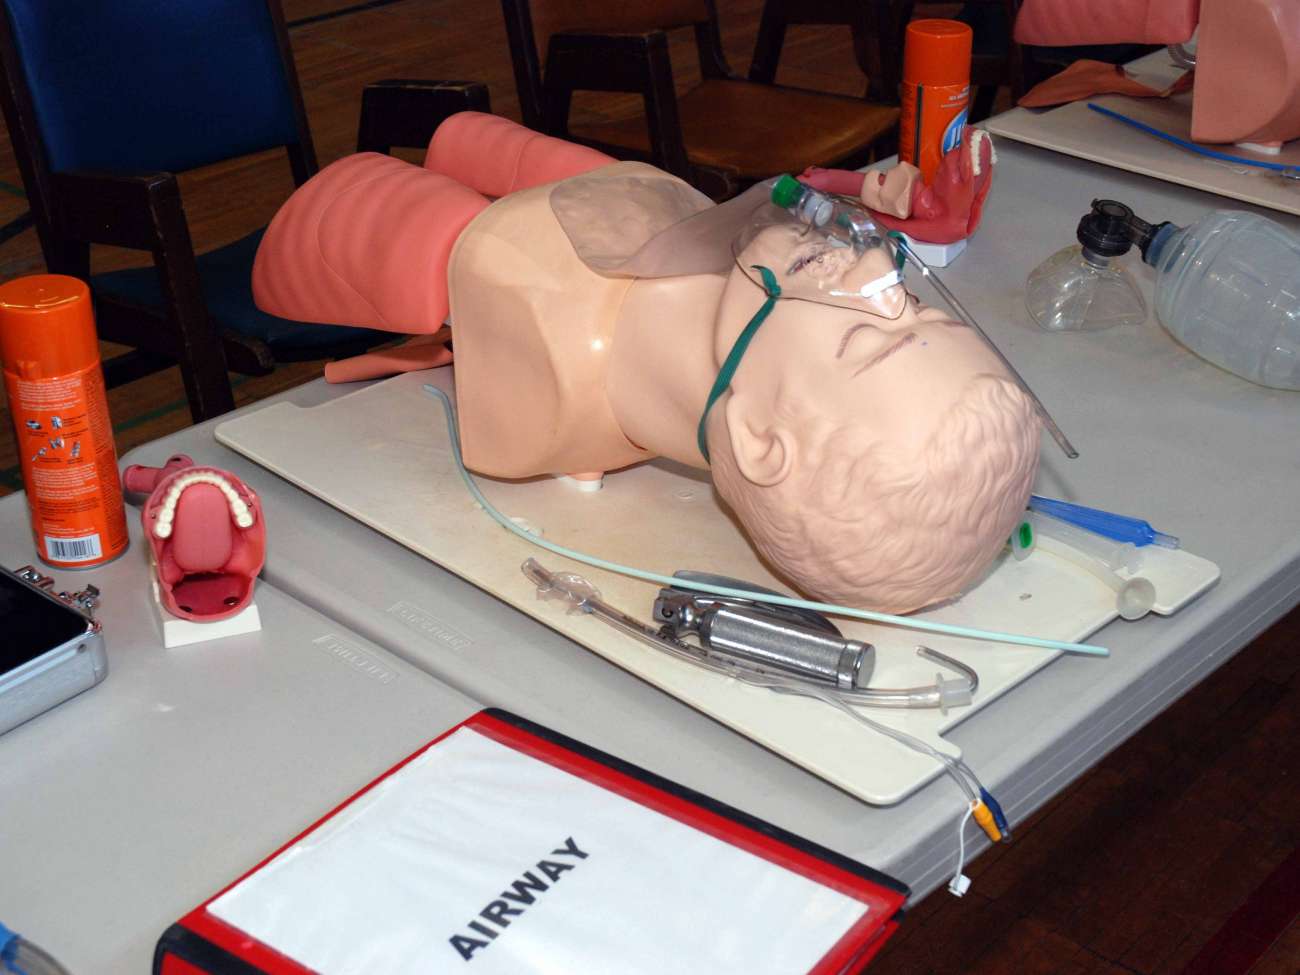 A demonstration model for advanced trauma life support training